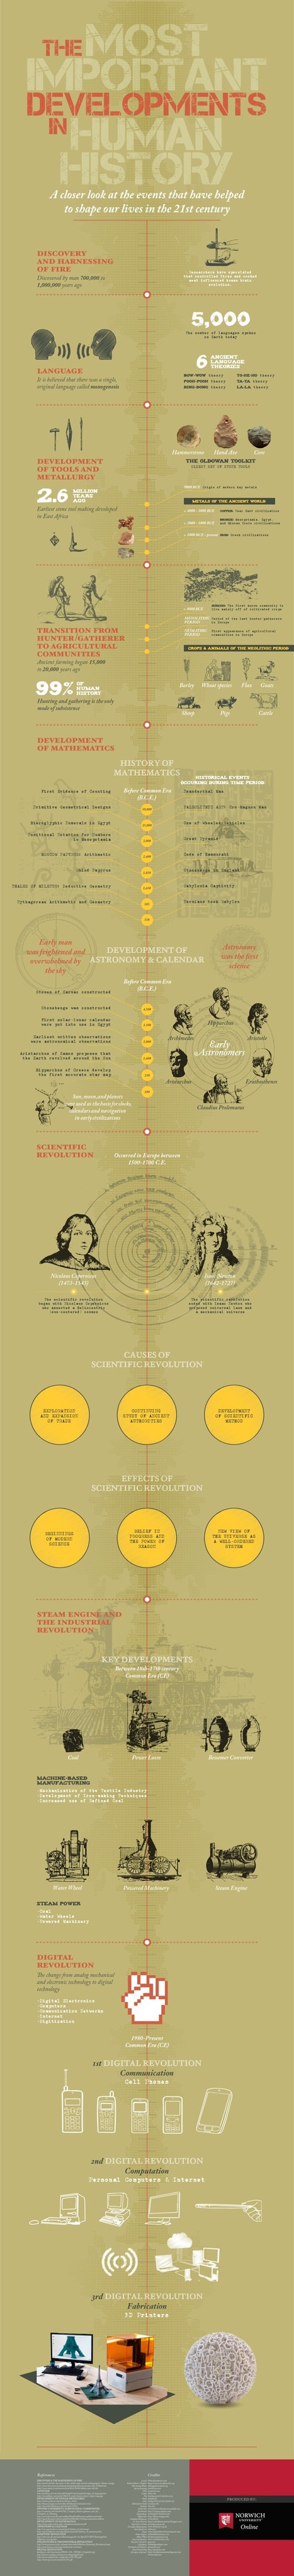 The Most Important Developments in Human History - Infographic | Education & Numérique | Scoop.it